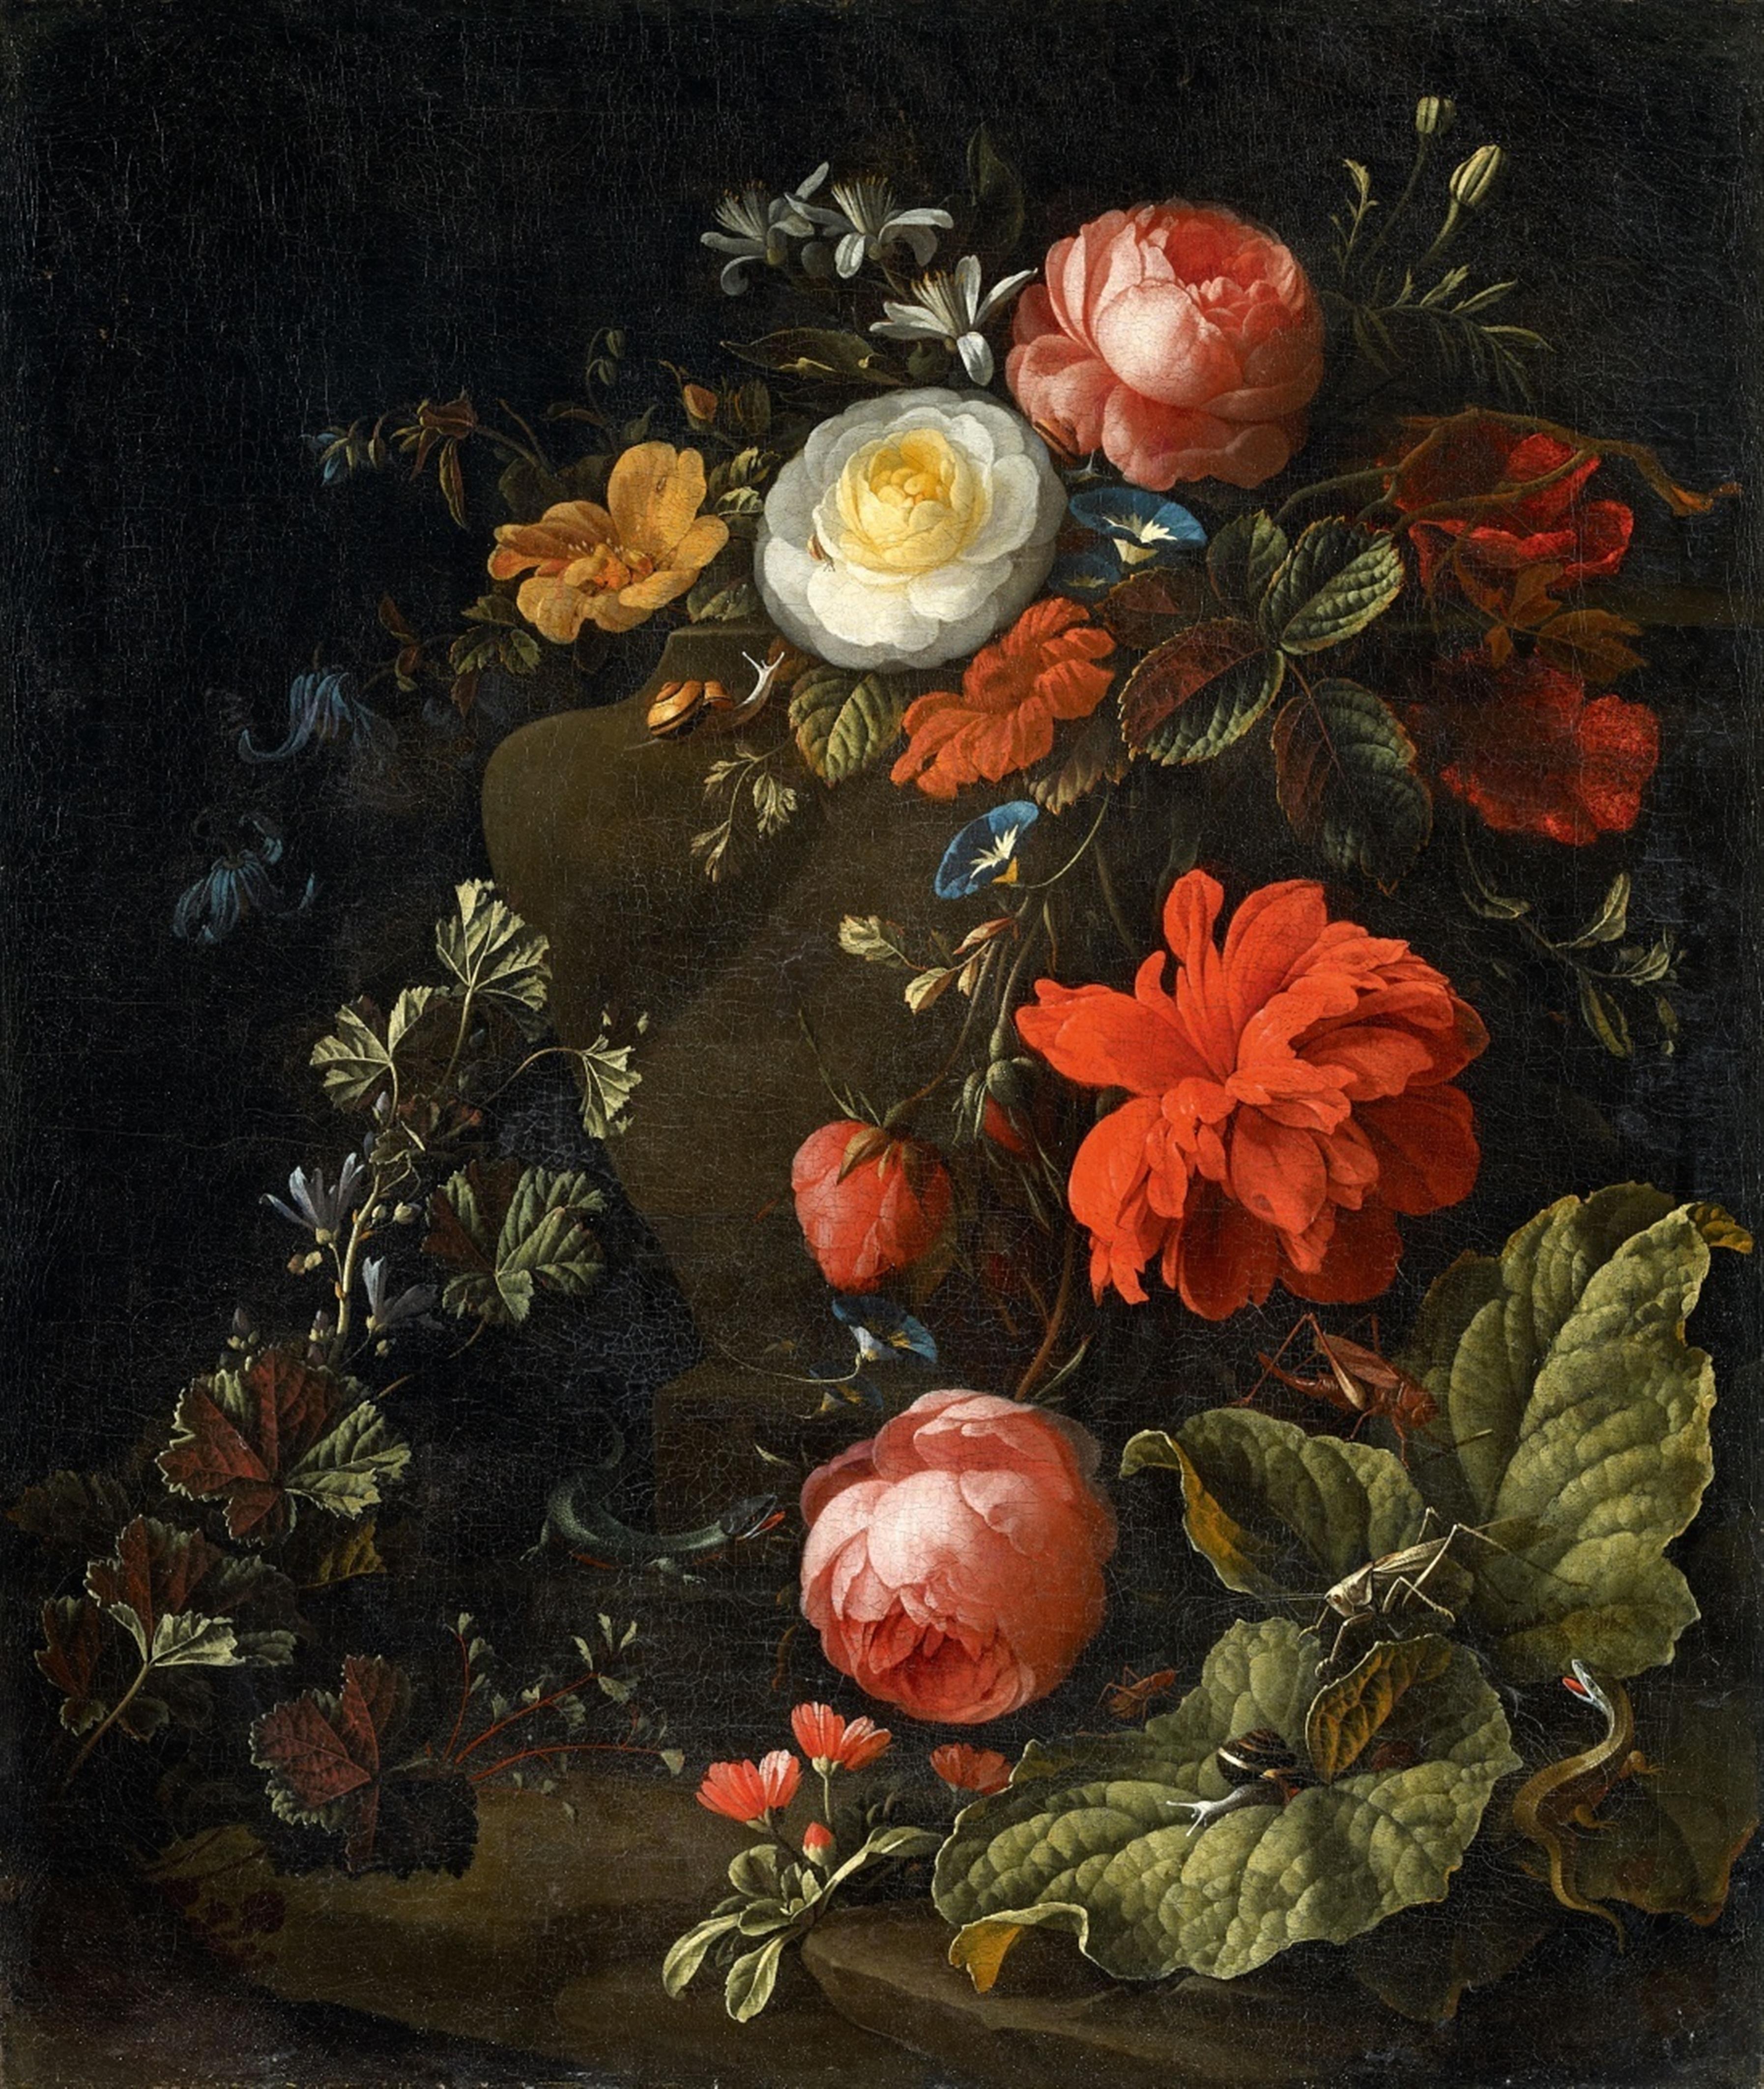 Elias van den Broeck - Floral Still Life with Insects - image-1